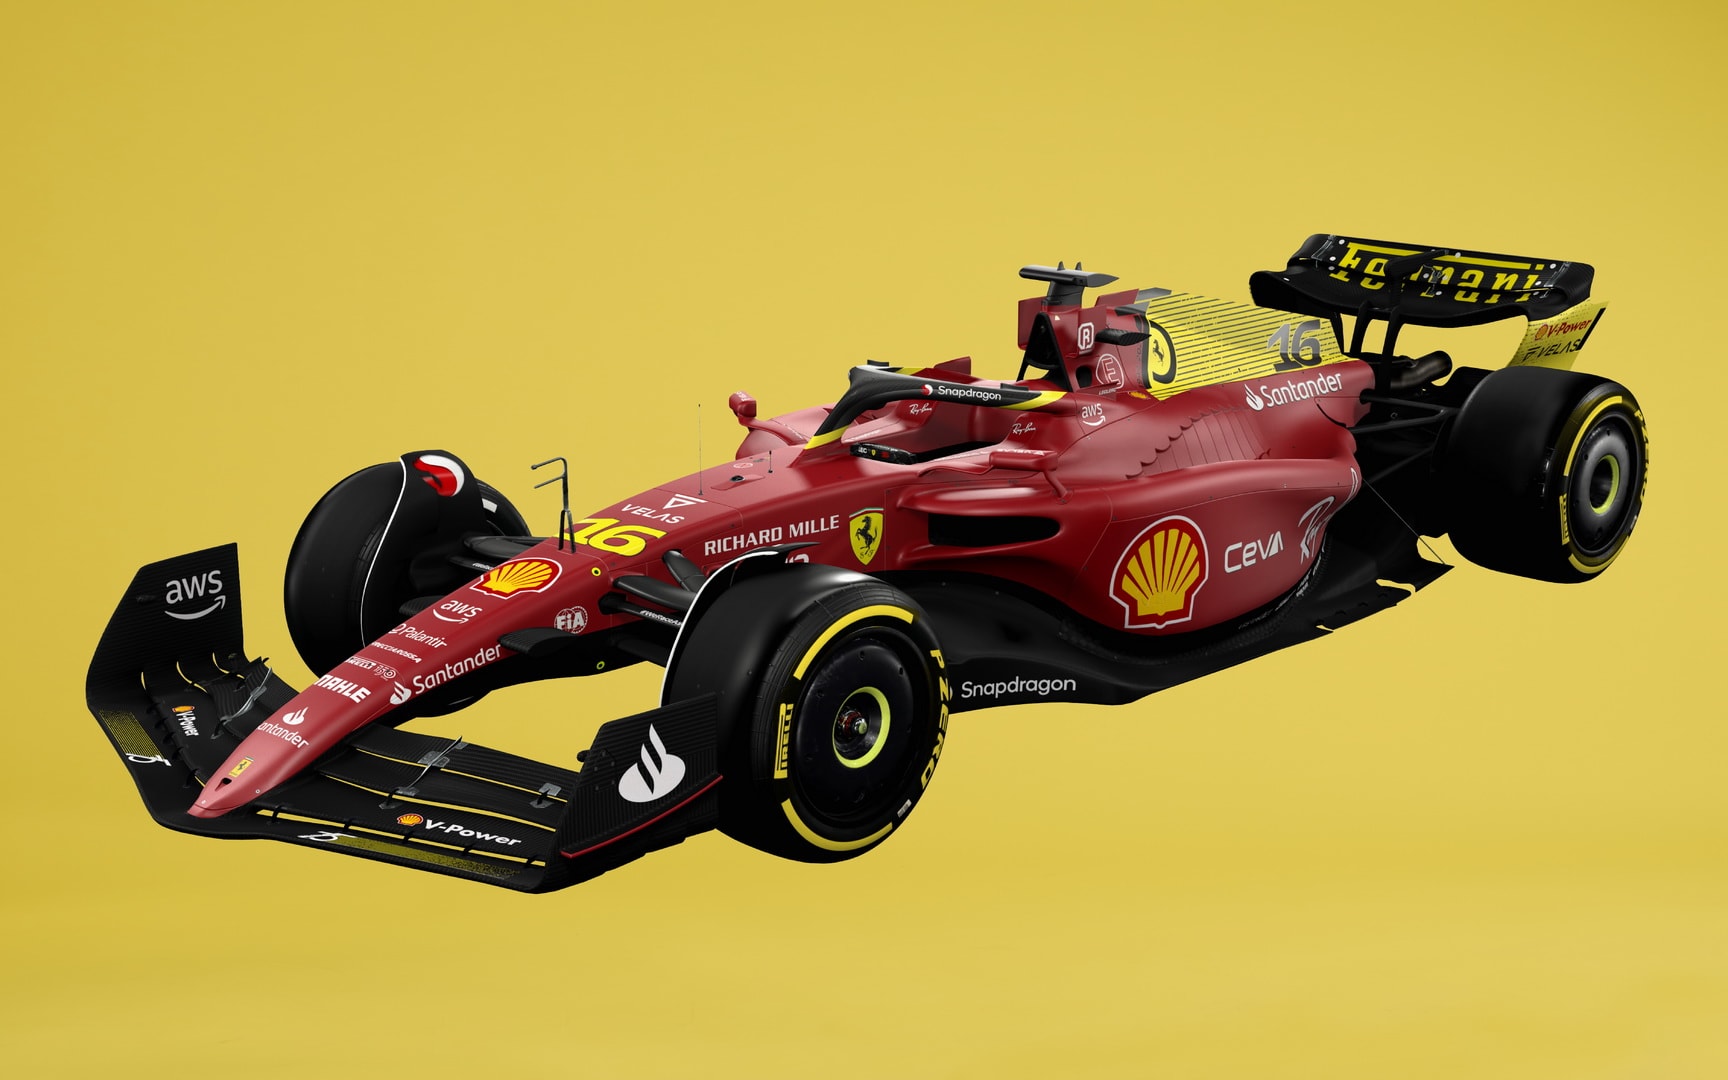 Ferrari Adds a Splash of Yellow to Its Livery for Monza to Celebrate